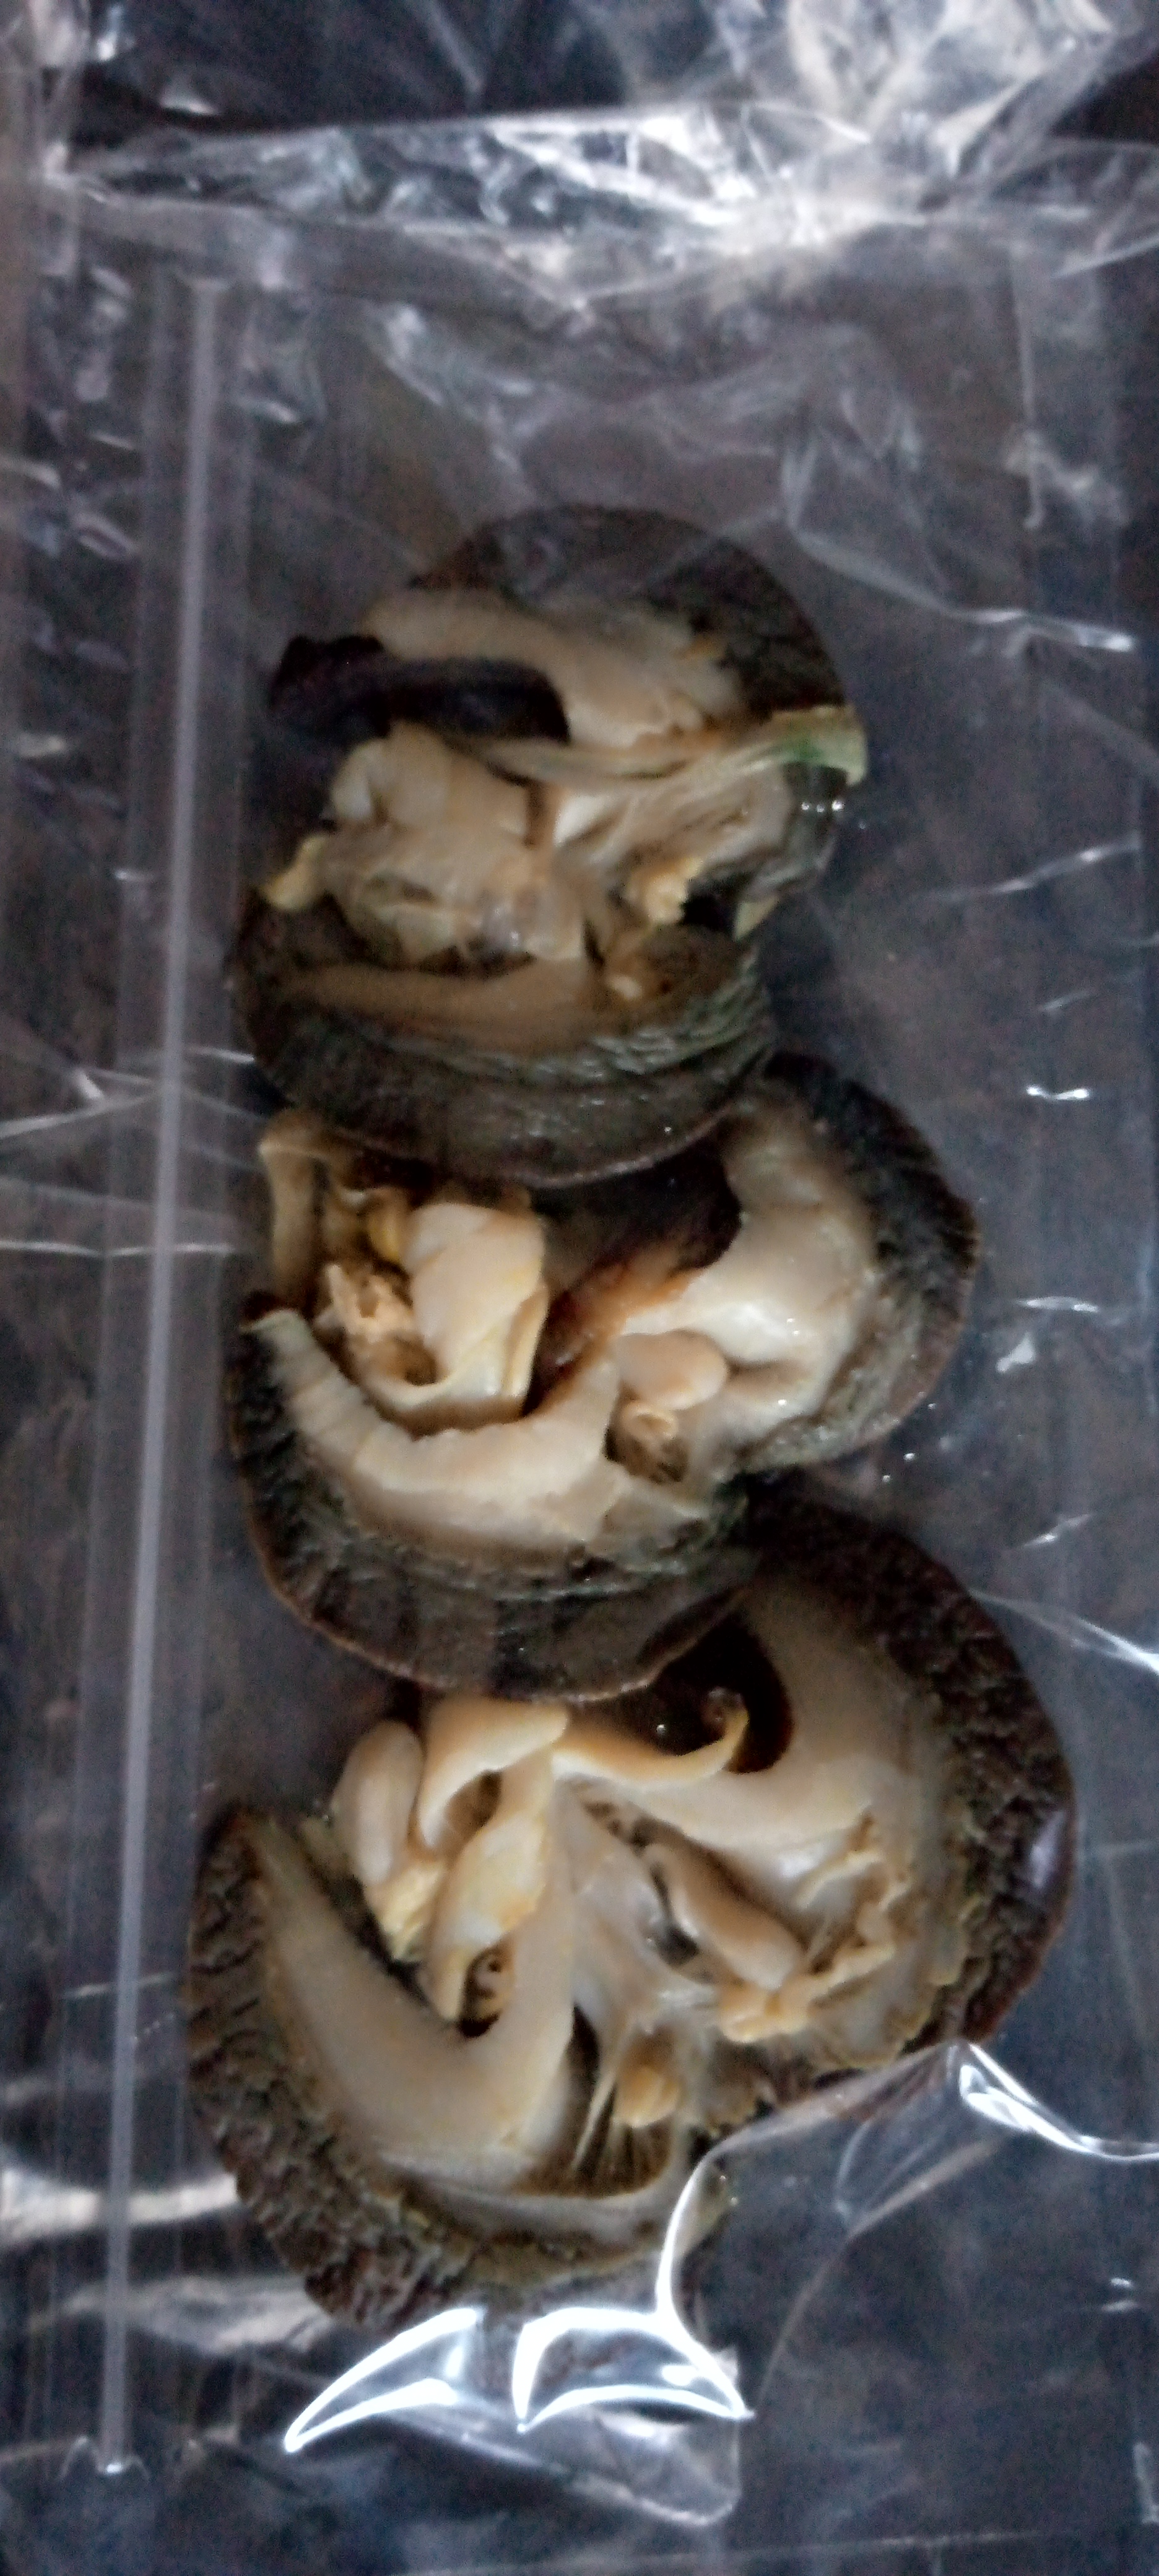  Frozen Jumbo size snails by  Crissy Foods And Agro Limited 

Jumbo size snails

Our business can supply large size  snails in large quantity

Weighing anywhere between 4-7 pounds, they’re caught fresh and kept healthy. 